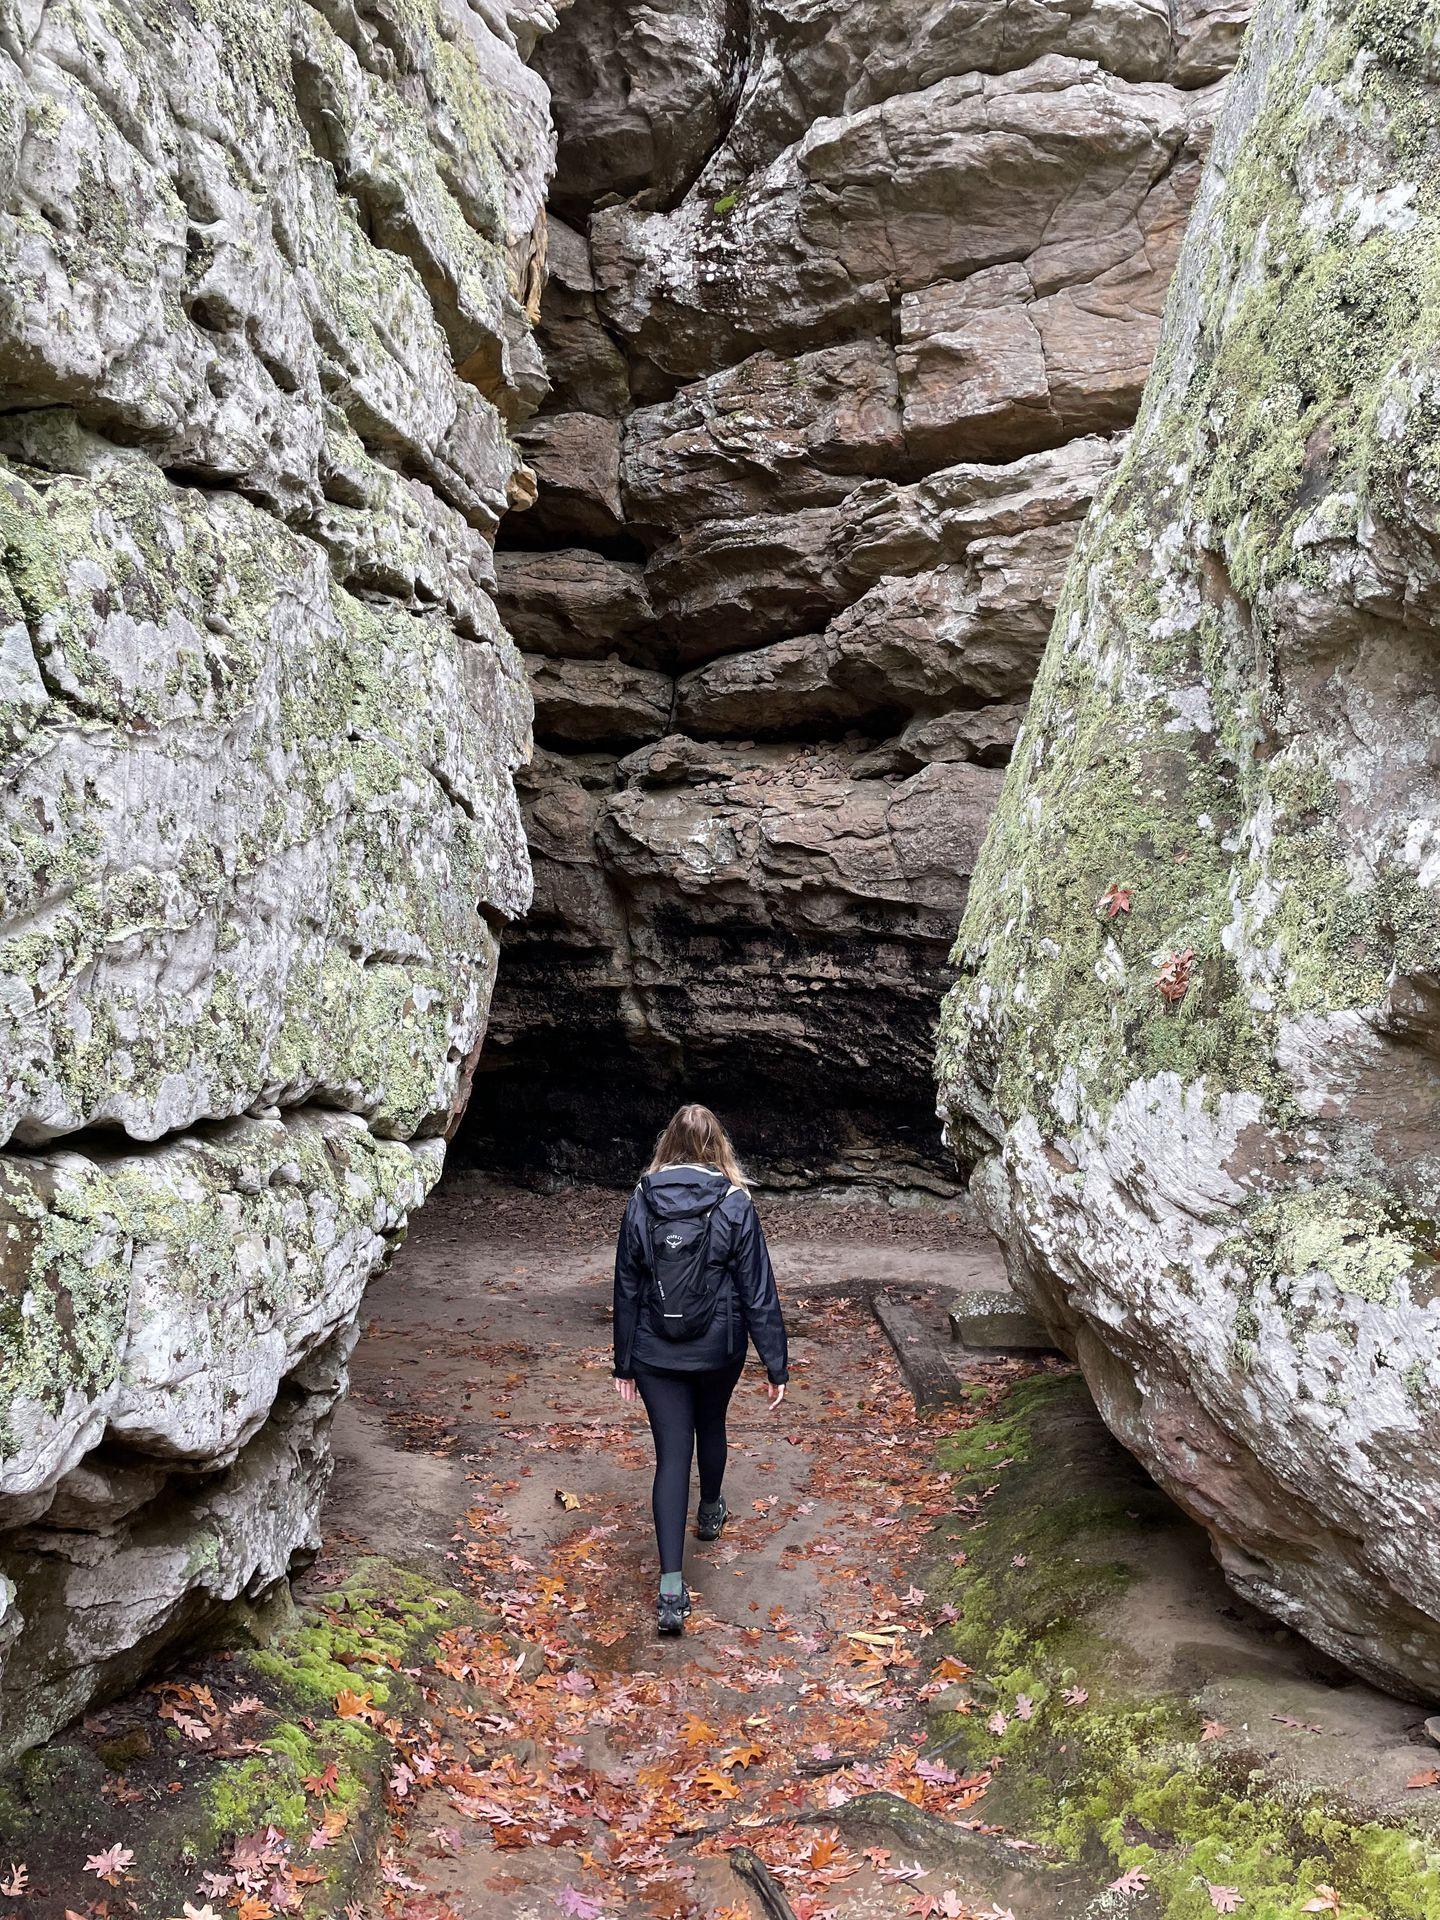 Lydia walking between tall, rock faces in the Bear Cave area at Petit Jean State Park.